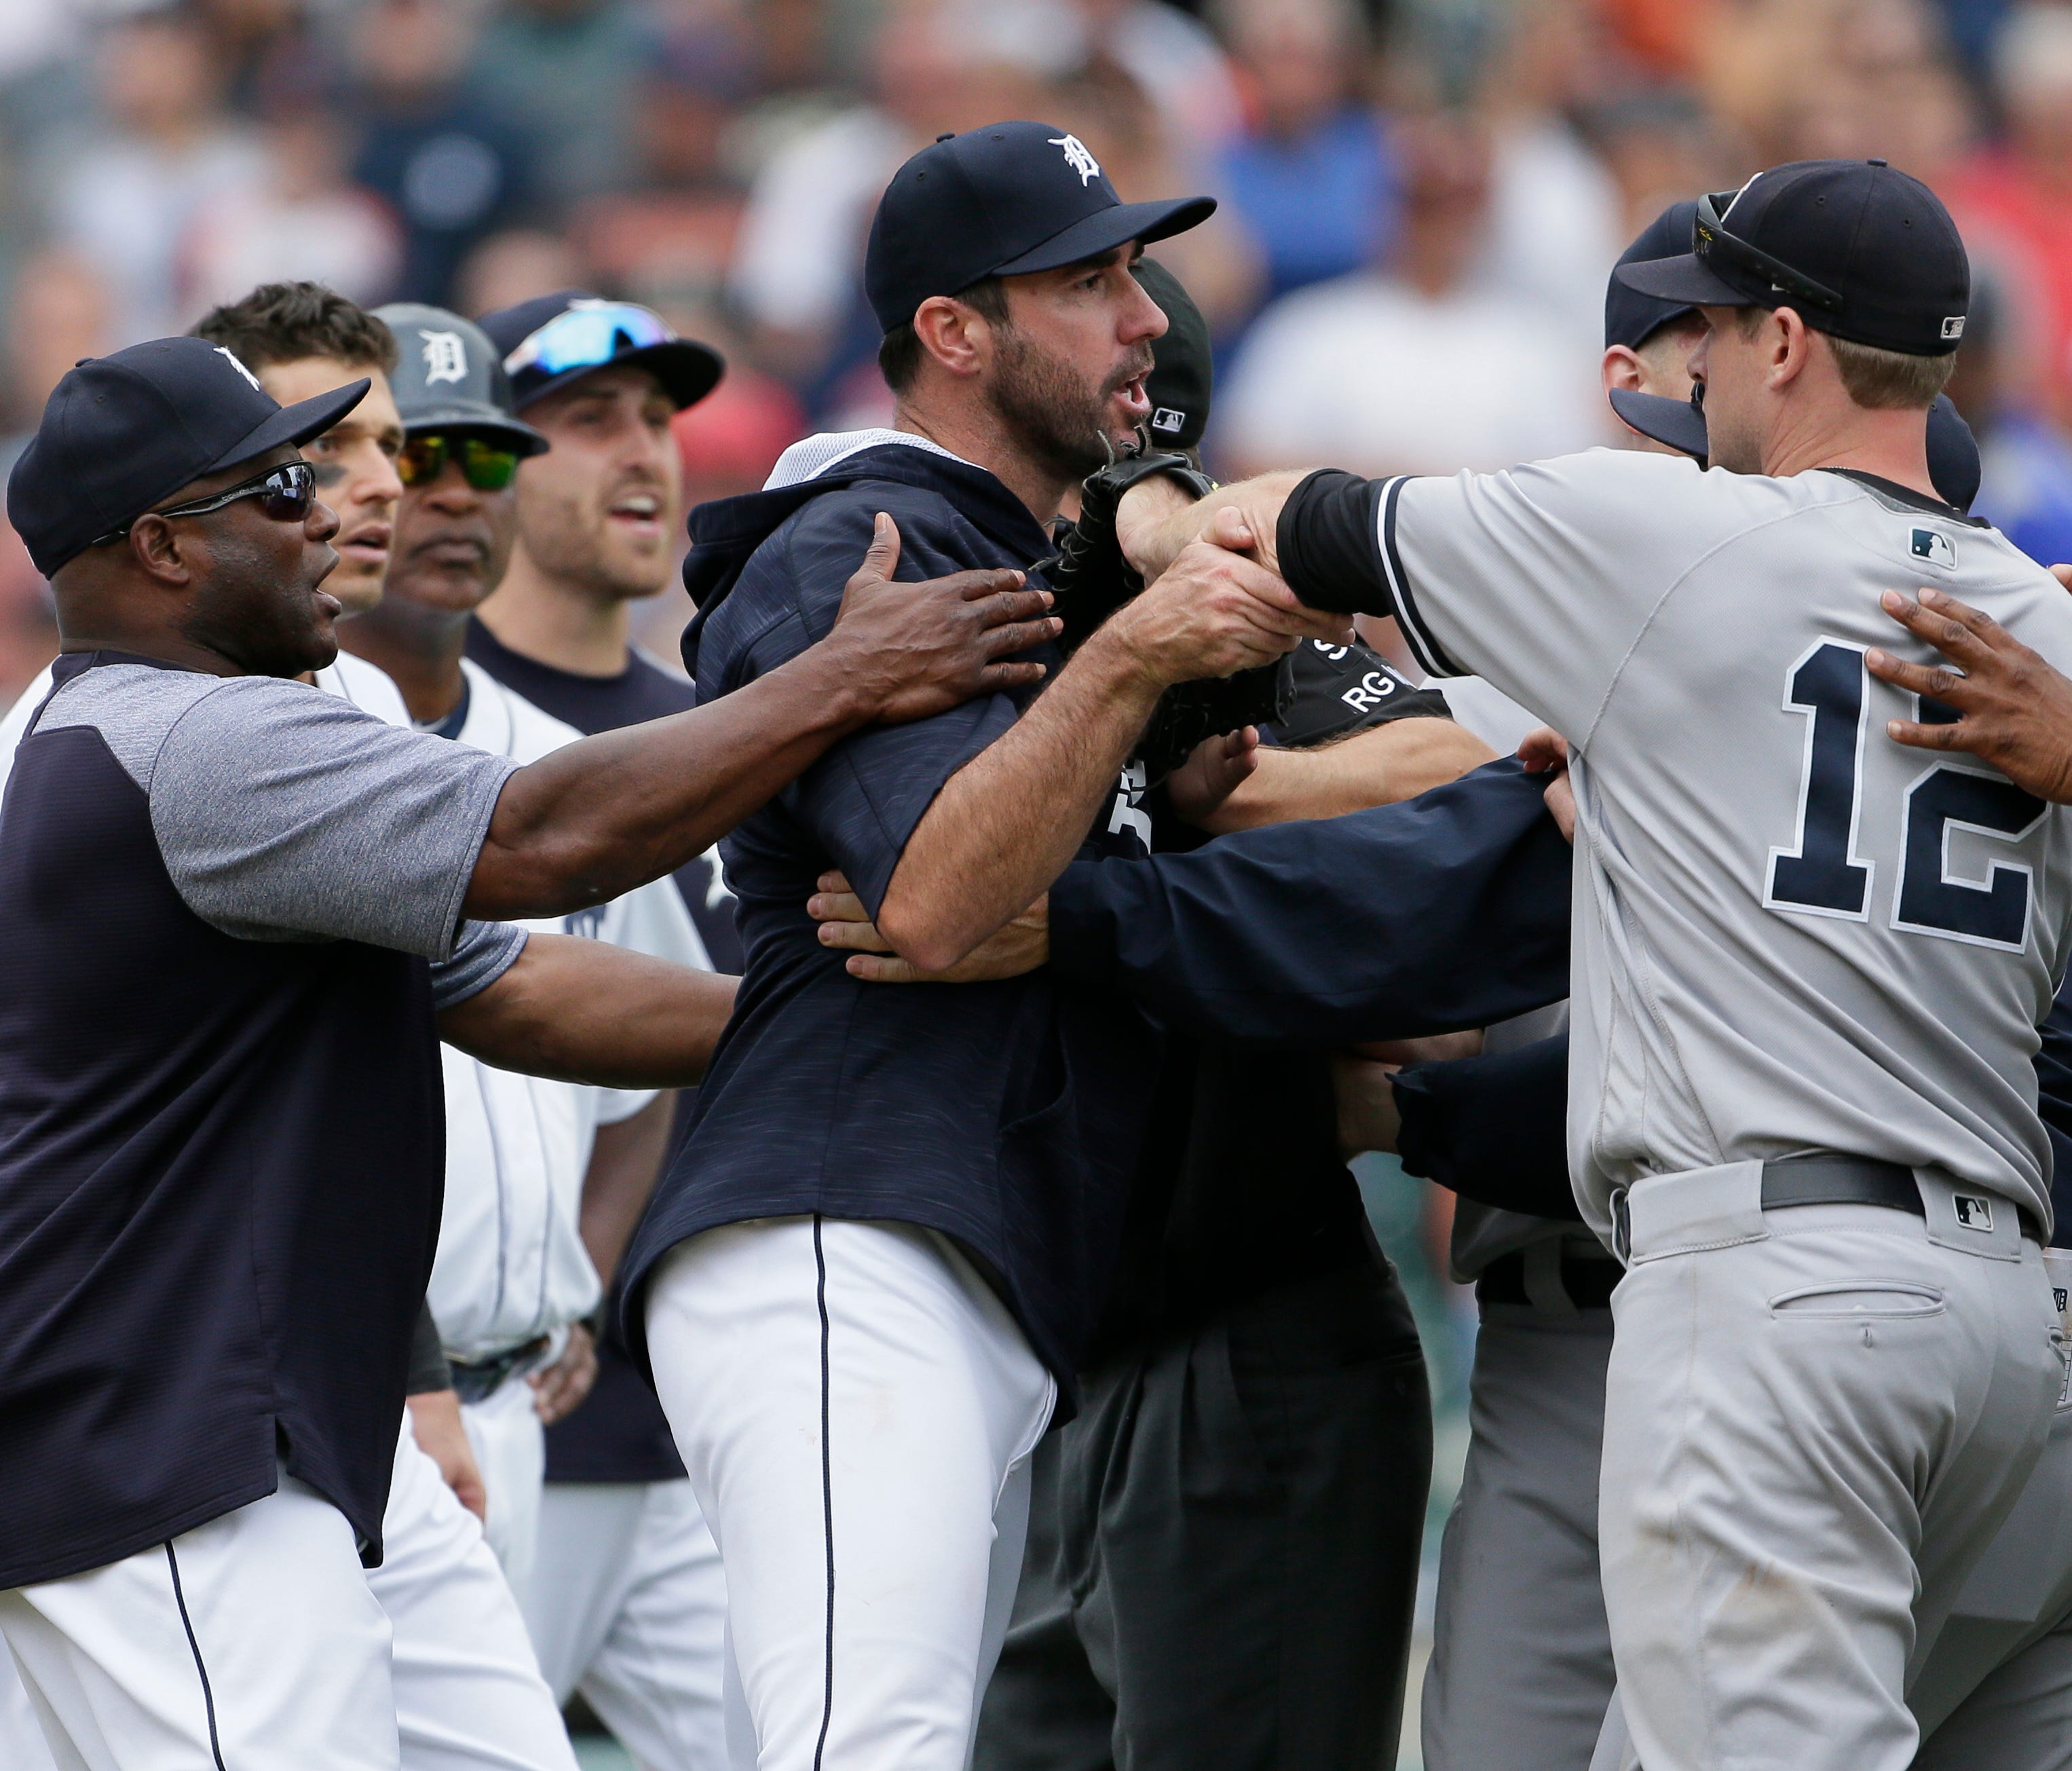 Tigers hitting coach Lloyd McClendon, left, tries to pull Justin Verlander, center, away from Yankees first baseman Chase Headley during the second bench-clearing of the Tigers' 10-6 win over the Yankees on Thursday, Aug. 24, 2017, at Comerica Park.